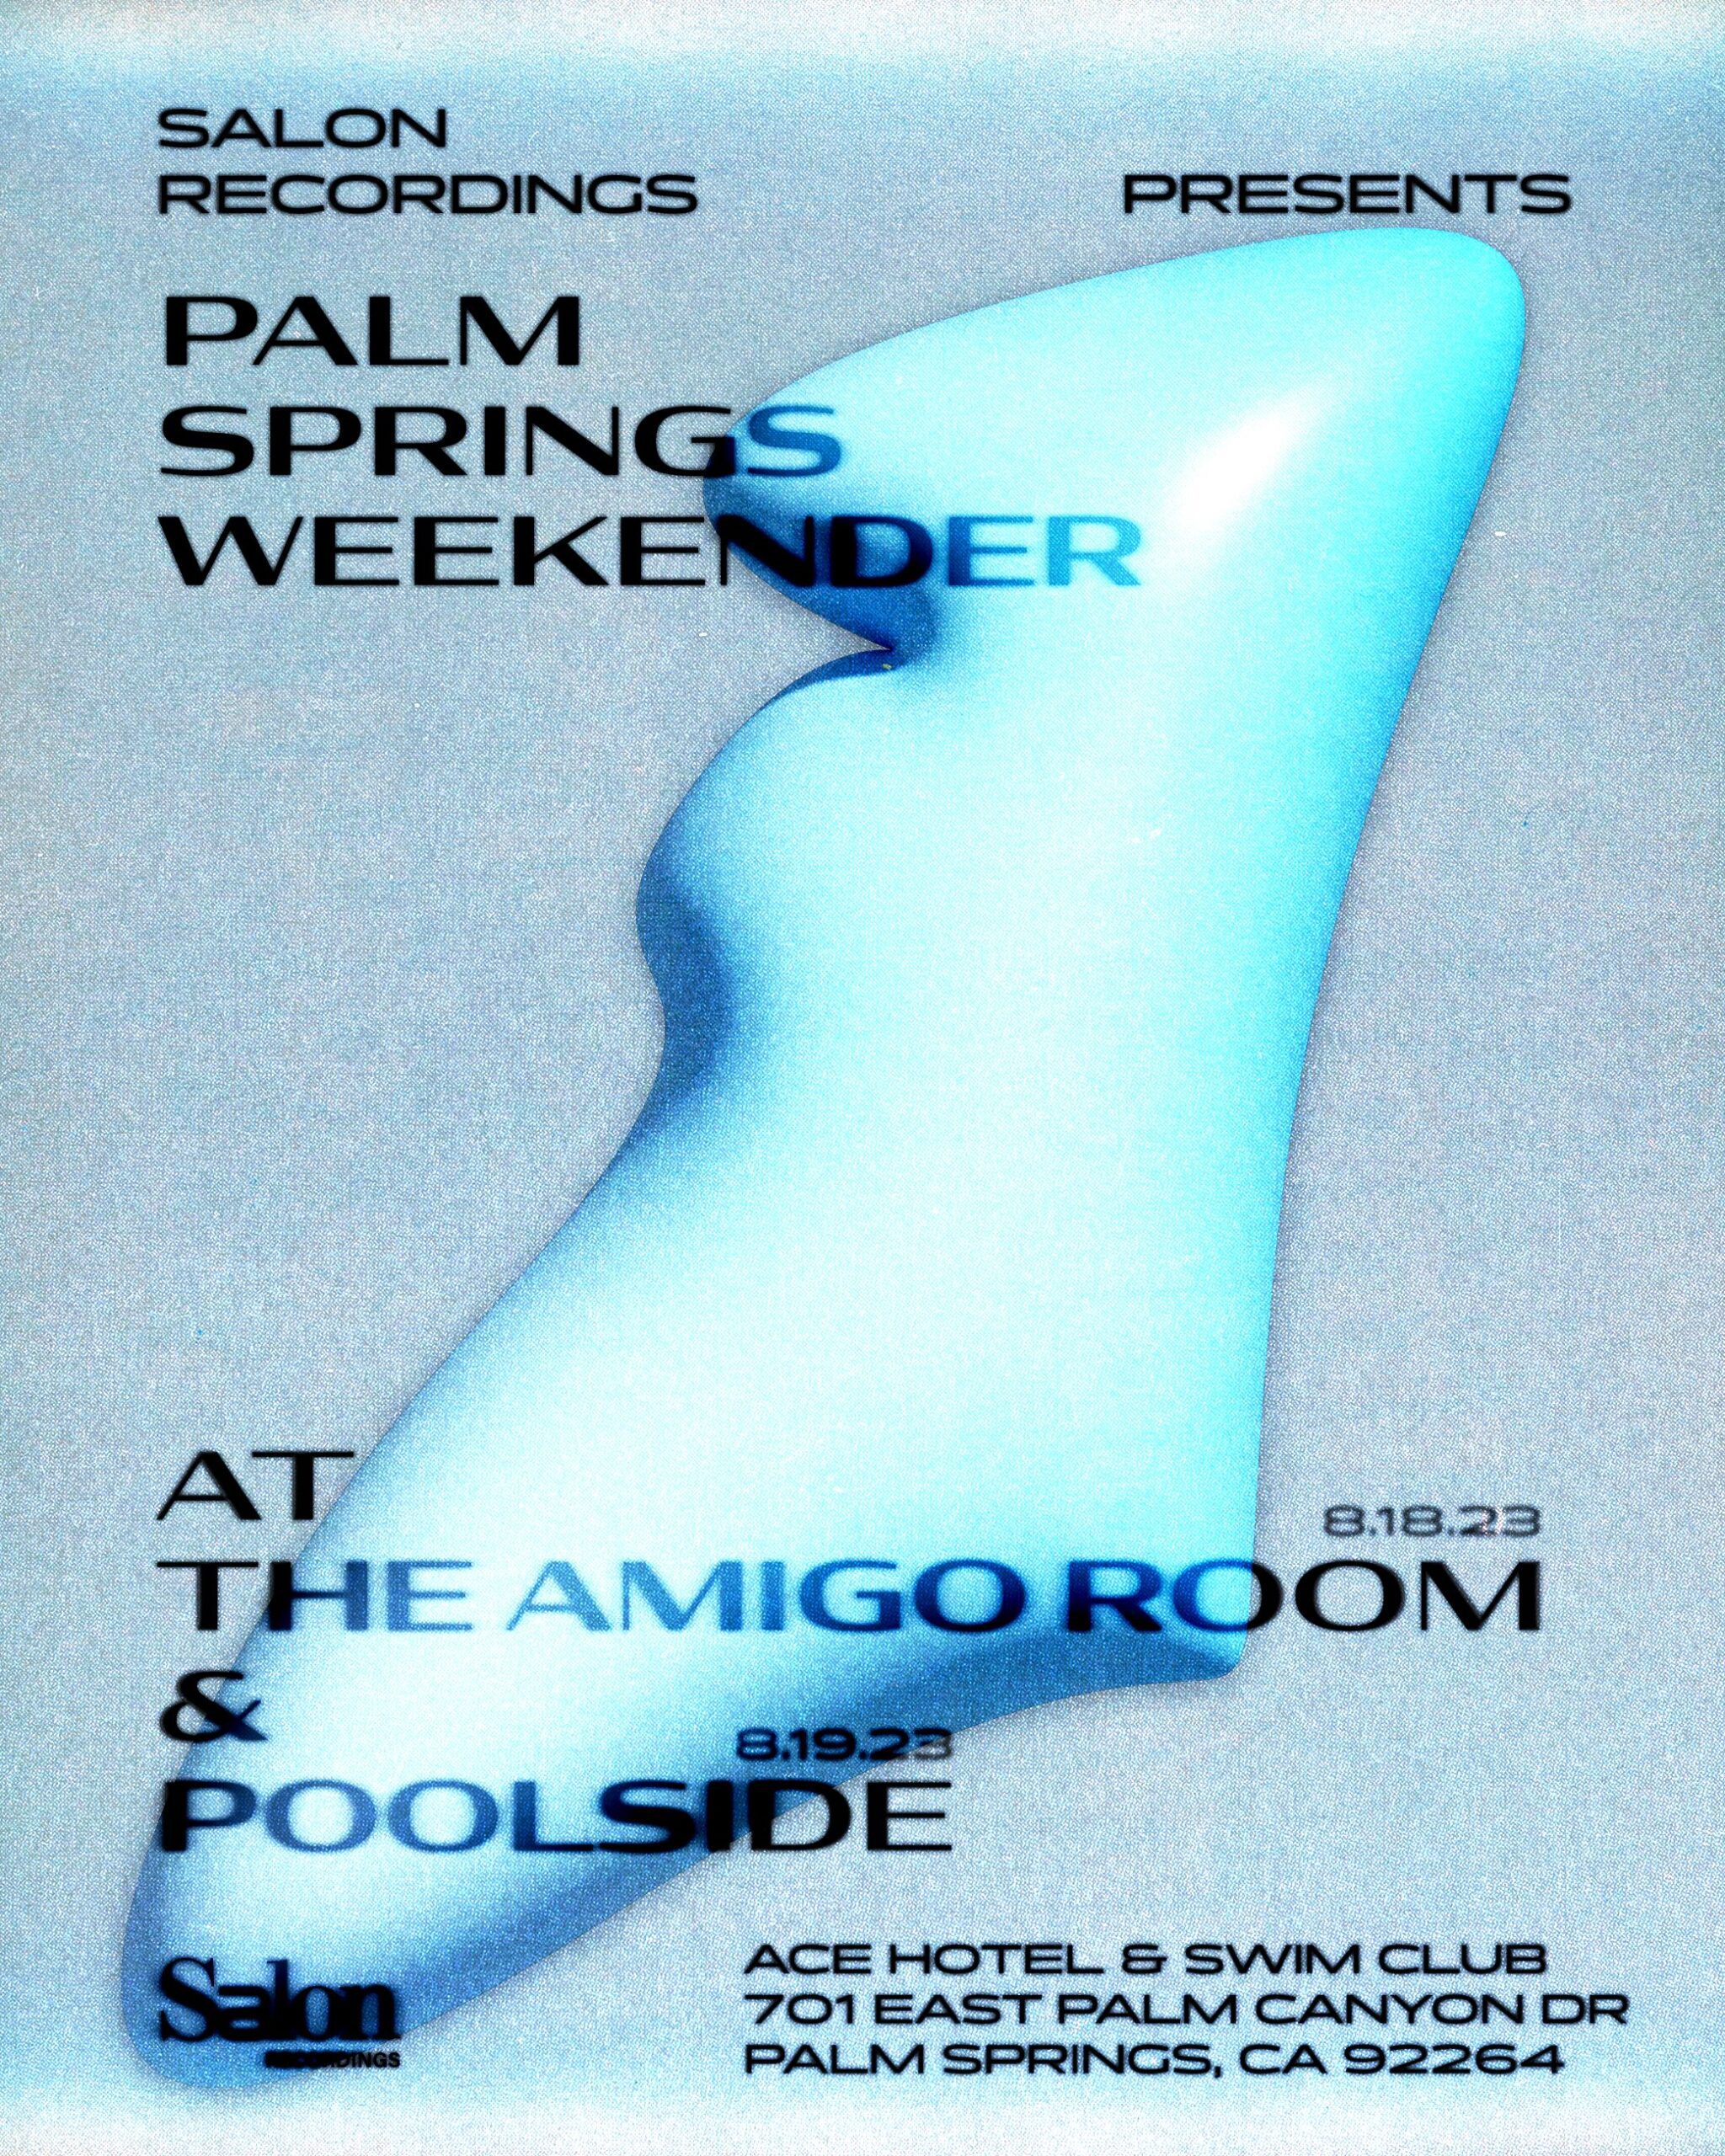 abstract art flier for Salon Recordings Amigo Room and Poolside